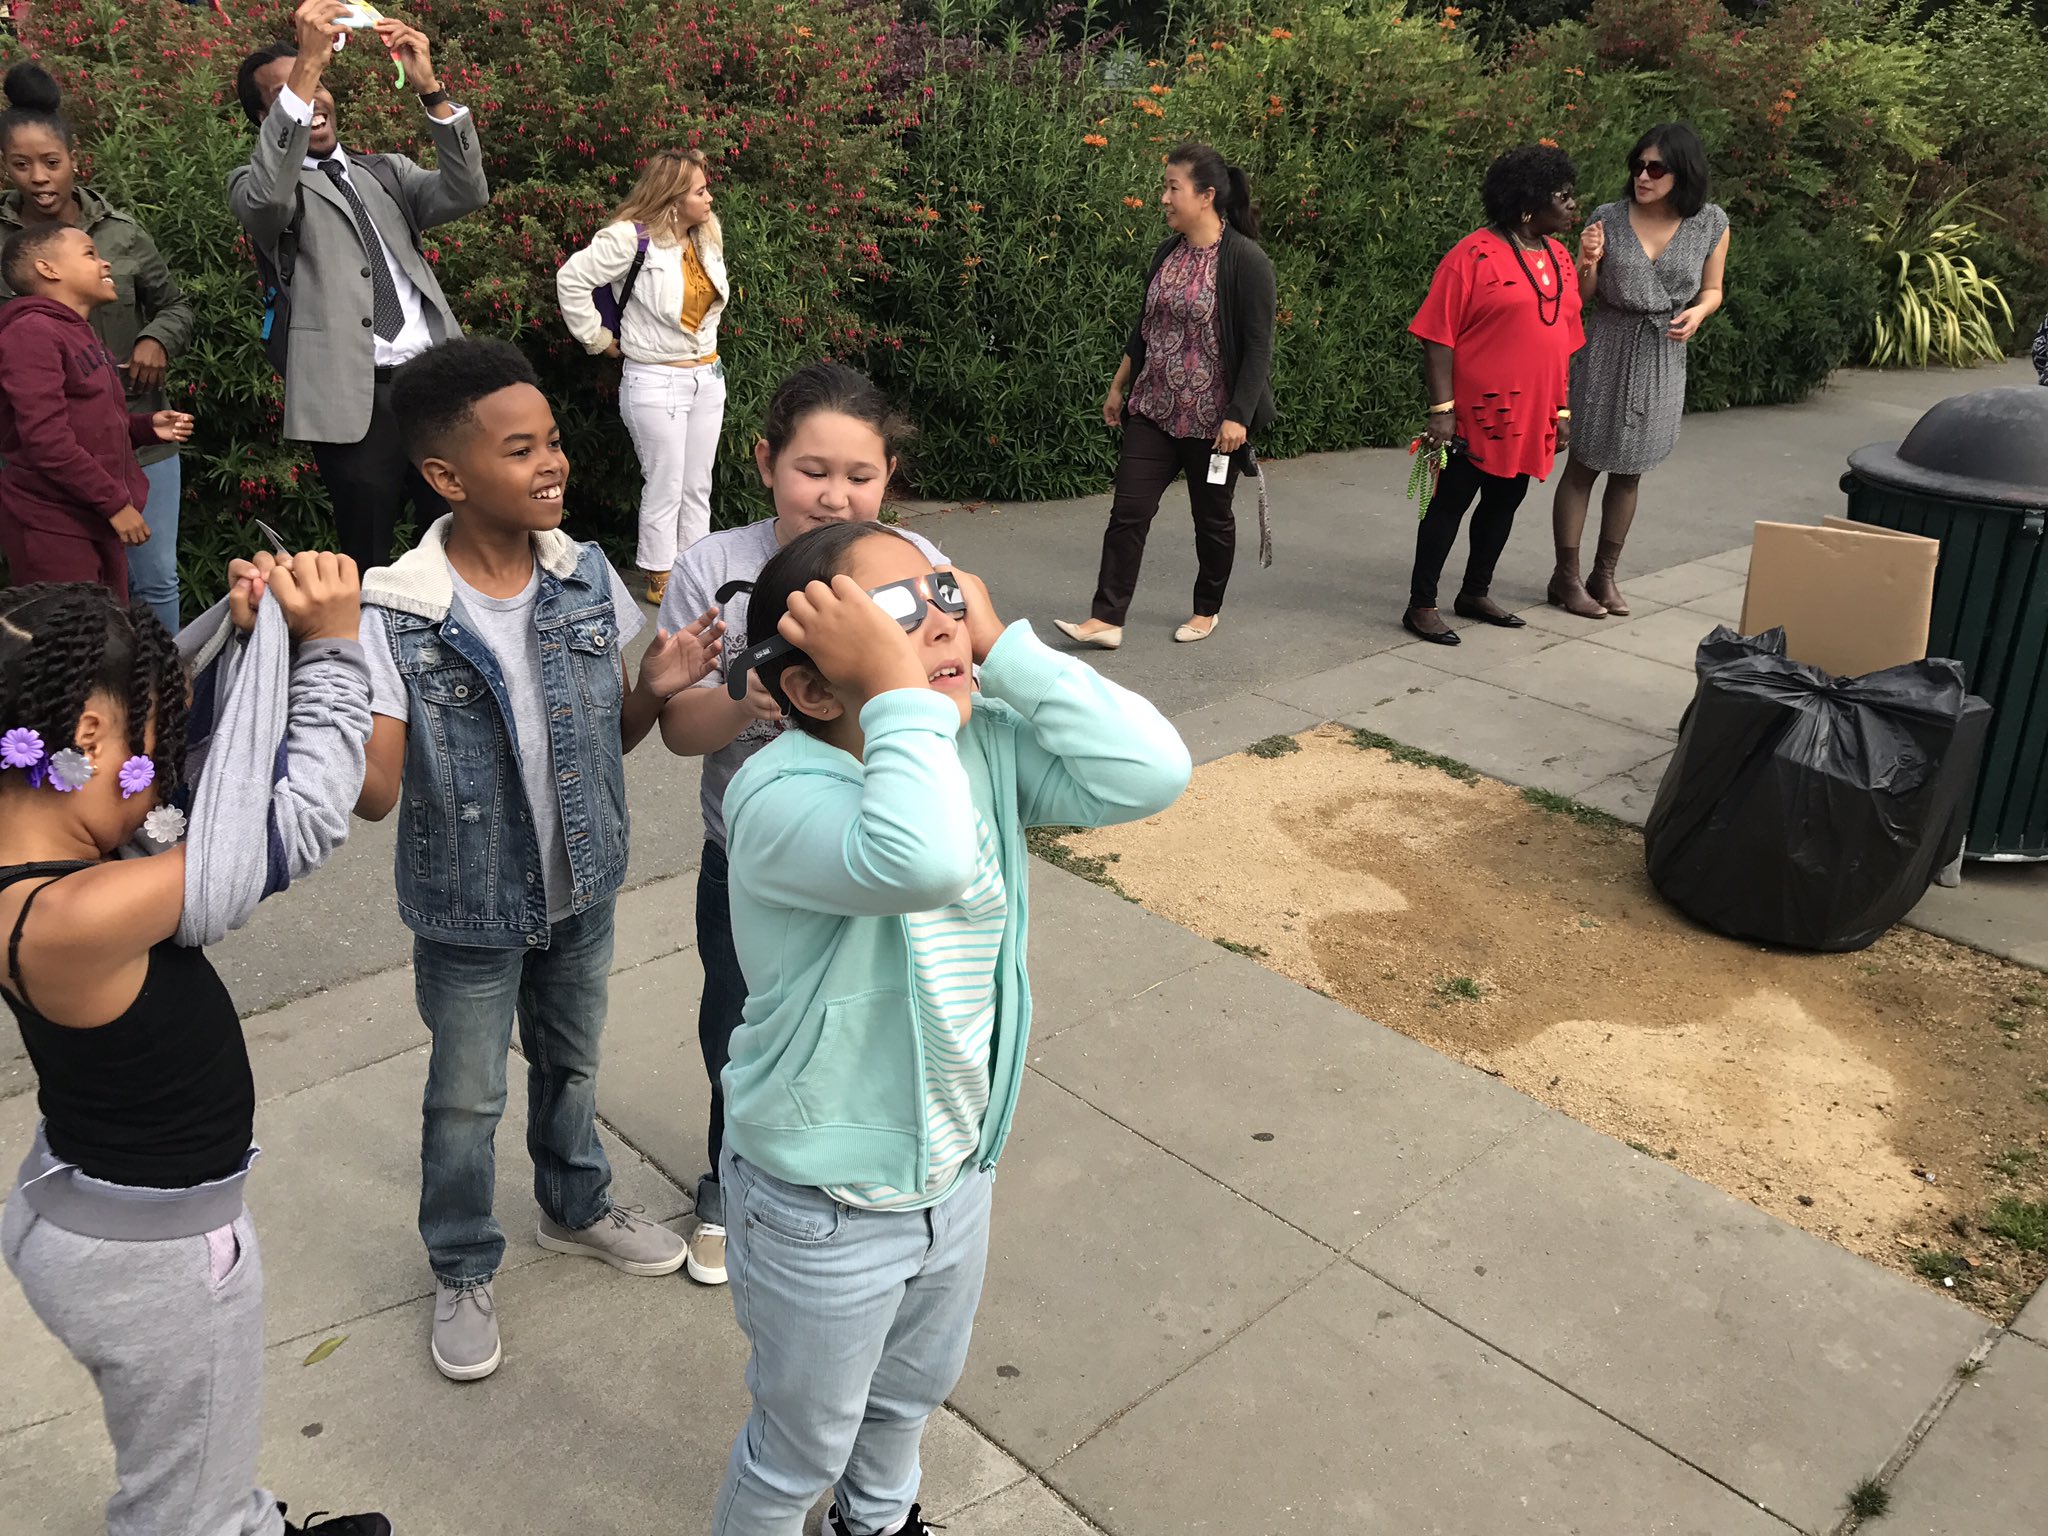 Matt Haney on Twitter: "Exciting first day of school at Bessie Carmichael watching eclipse! Welcome back everyone!! @JaneKim https://t.co/9O4dEGDkhz" / Twitter